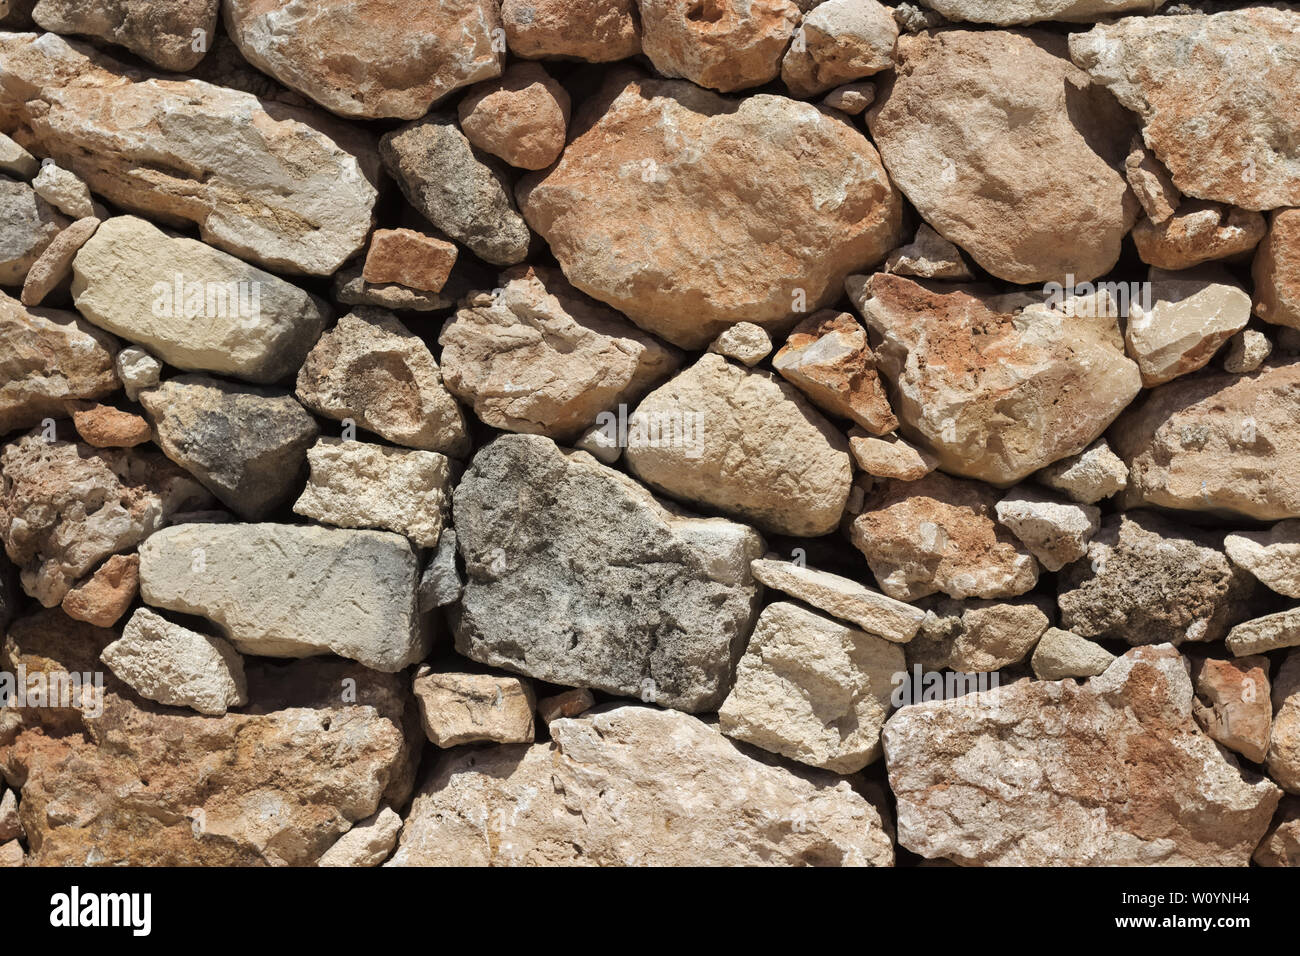 Natural beige stone wall (masonry) created by stacking stones on top of each other with varying stone sizes. Stock Photo